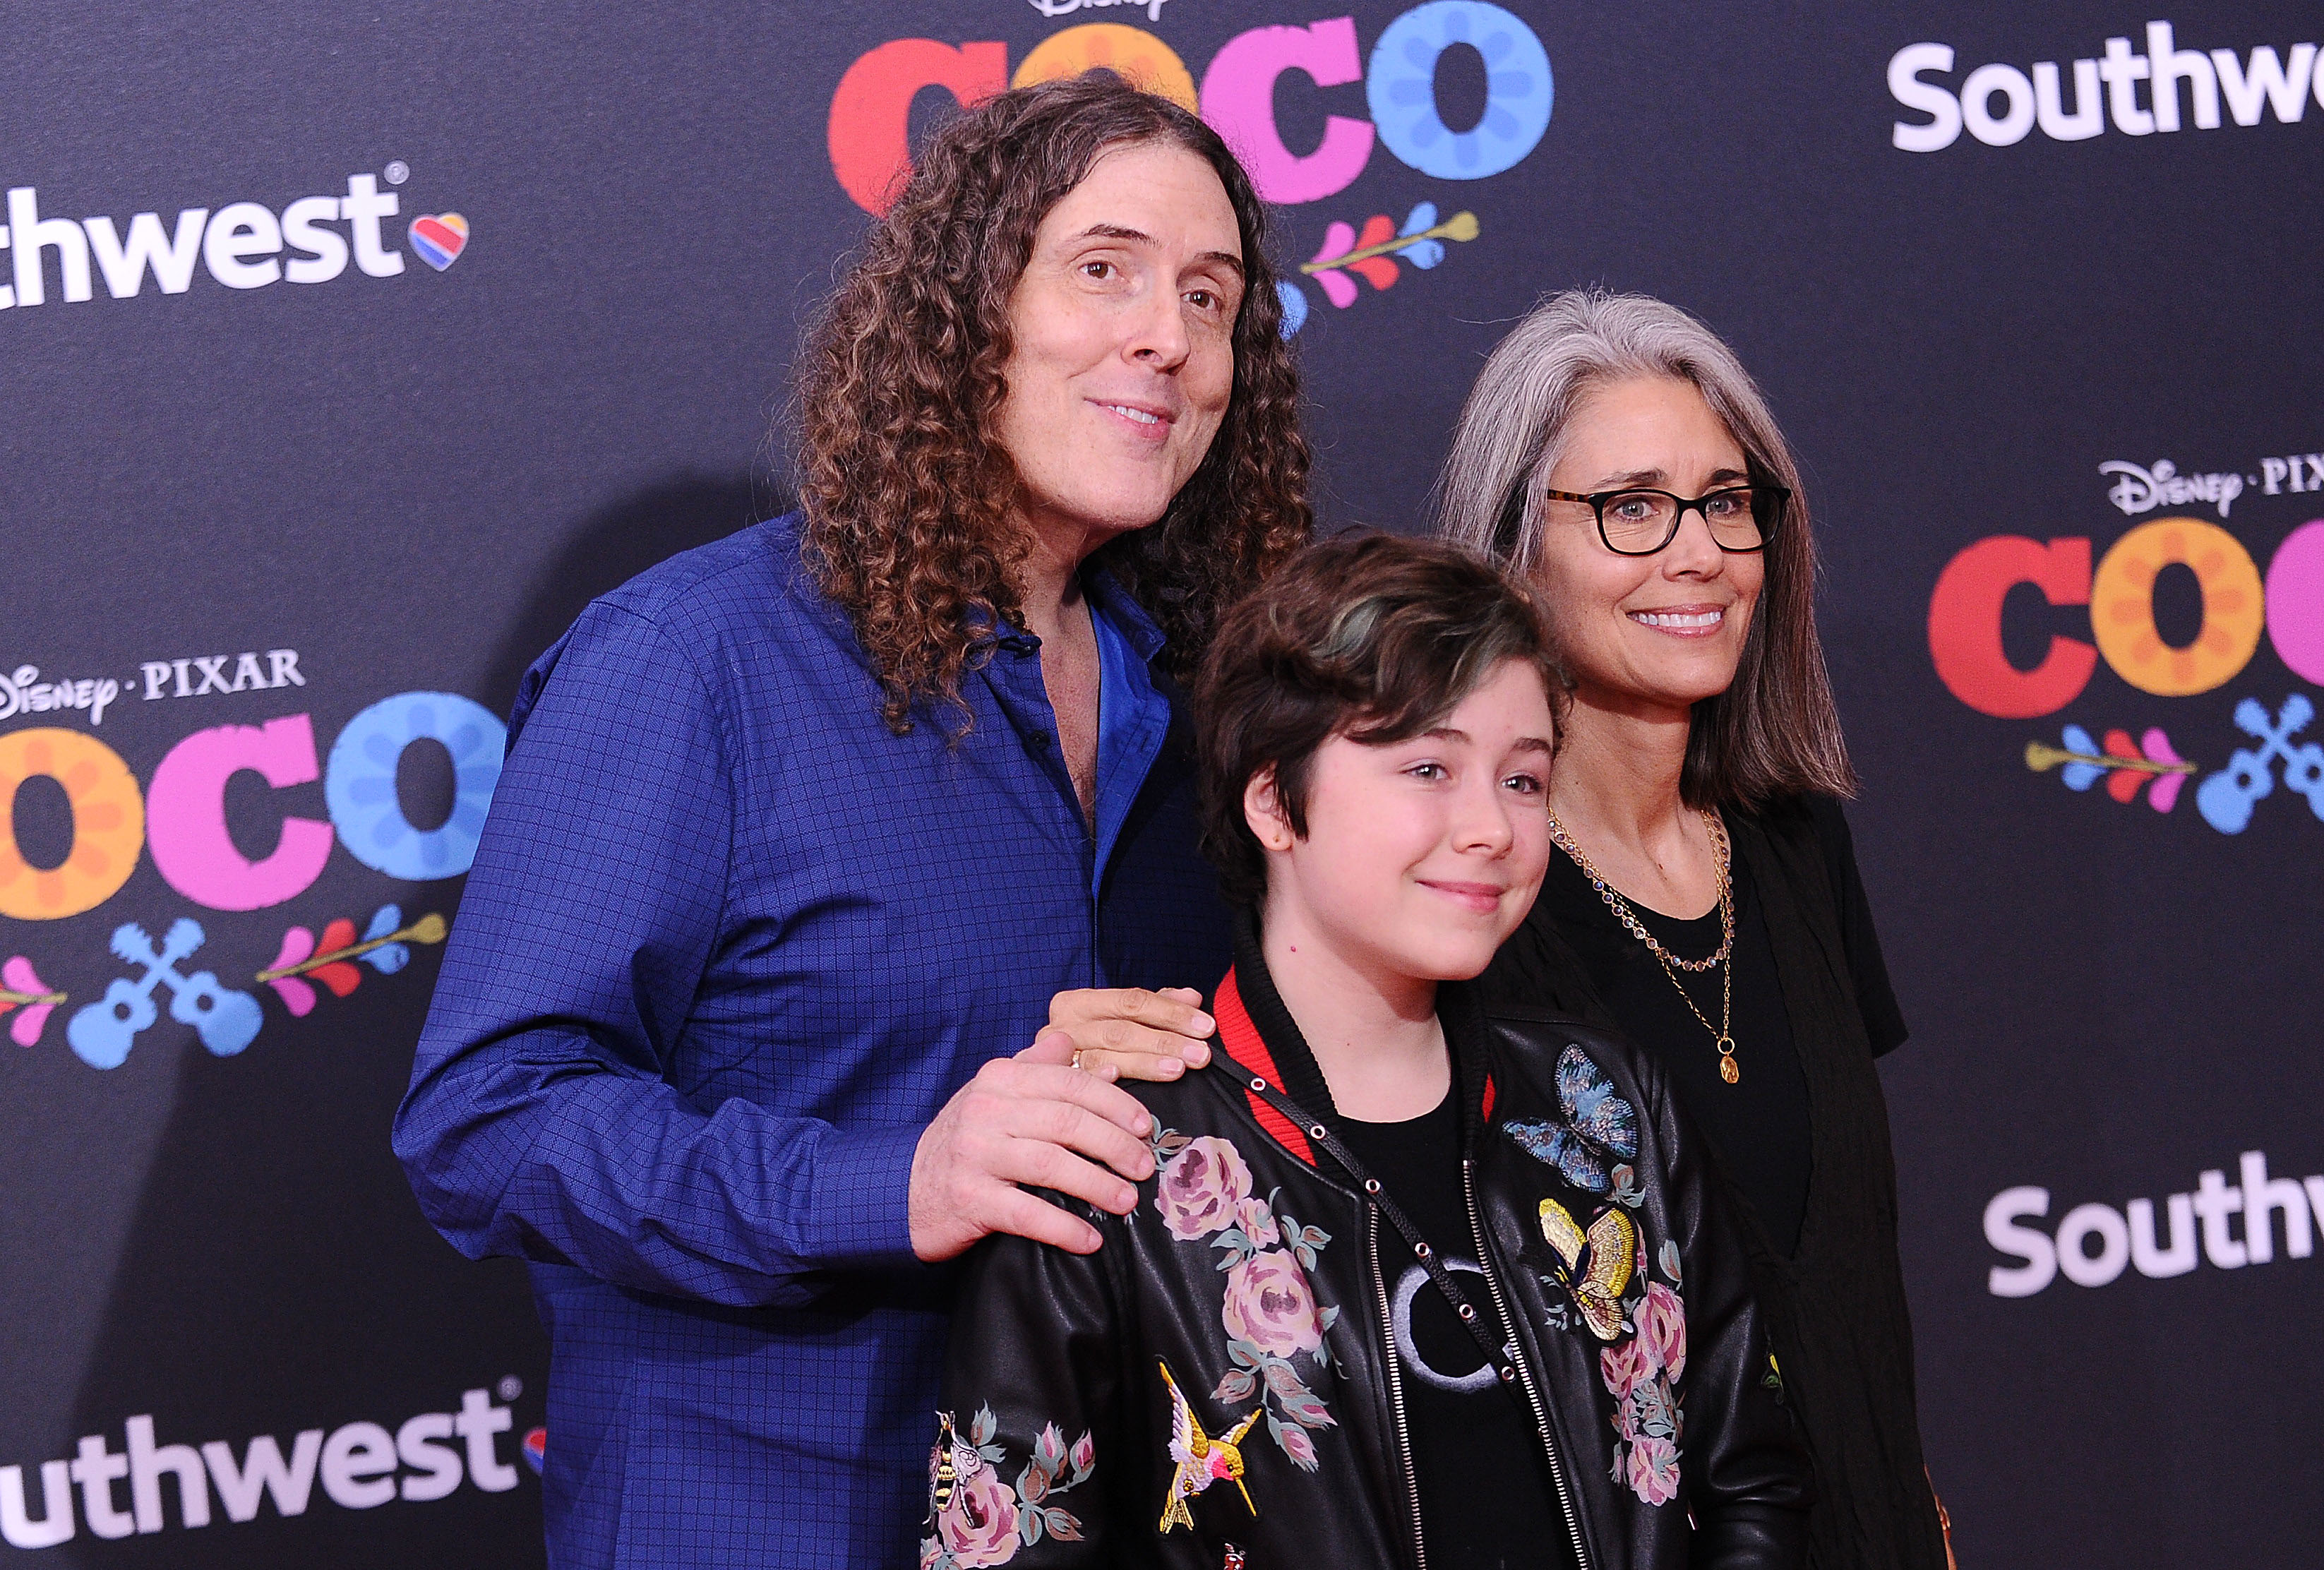 "Weird Al" Yankovic, Suzanne Yankovic, and Yankovic at the premiere of "Coco" at El Capitan Theatre on November 8, 2017, in Los Angeles, California. | Source: Getty Images